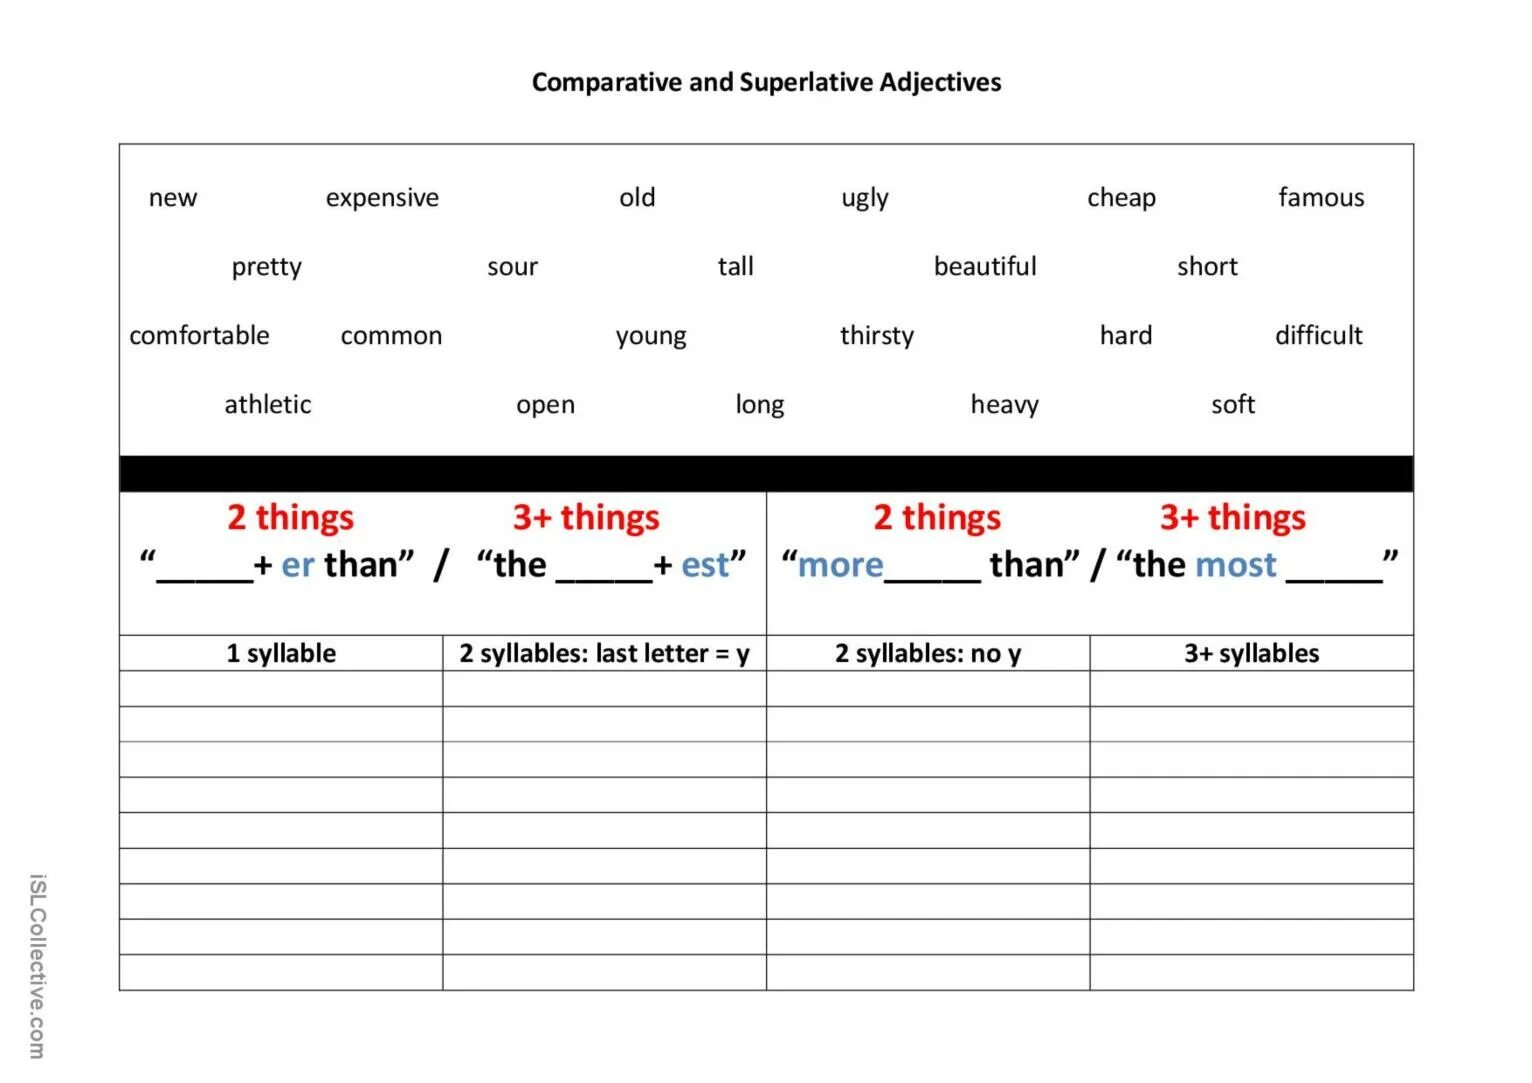 Comparatives and superlatives упражнения. Comparative and Superlative adjectives. Comparatives and Superlatives Worksheets. Comparative and Superlative adjectives Worksheets. Comparative and Superlative adjectives 4 класс.